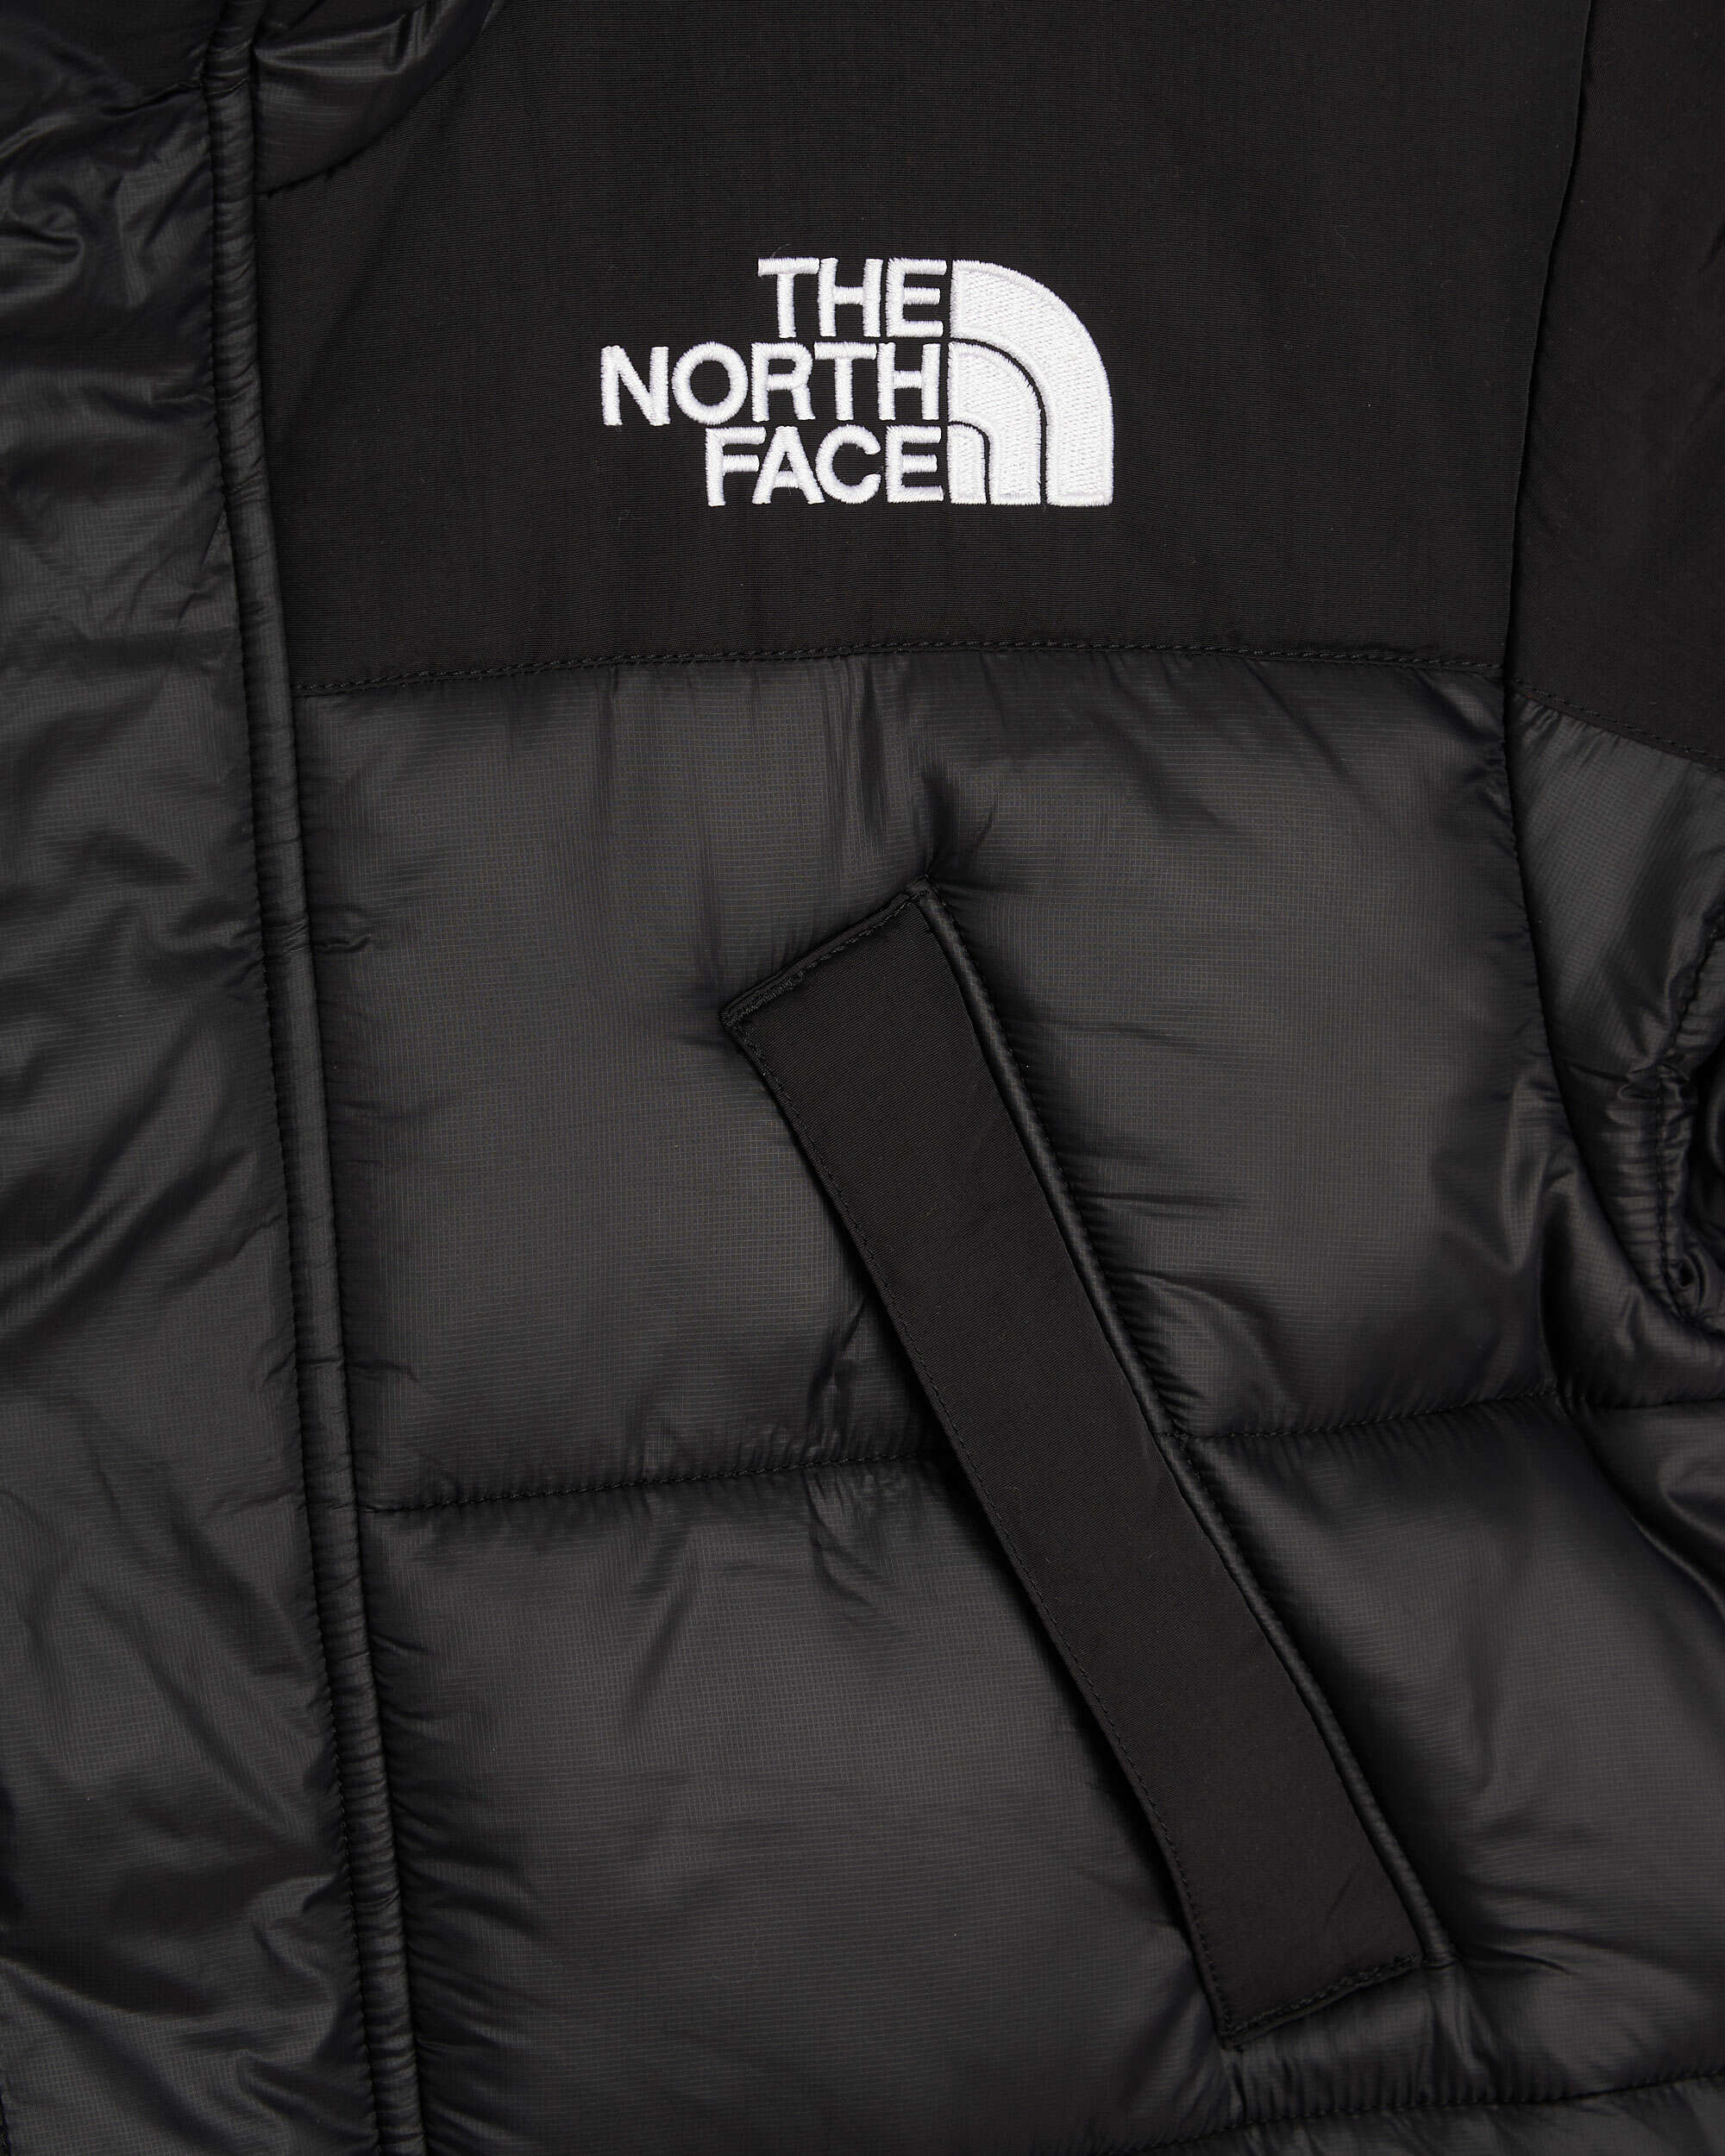 The North Face Himalayan Insulated Parka NF0A4QZ5JK3, Doudounes homme